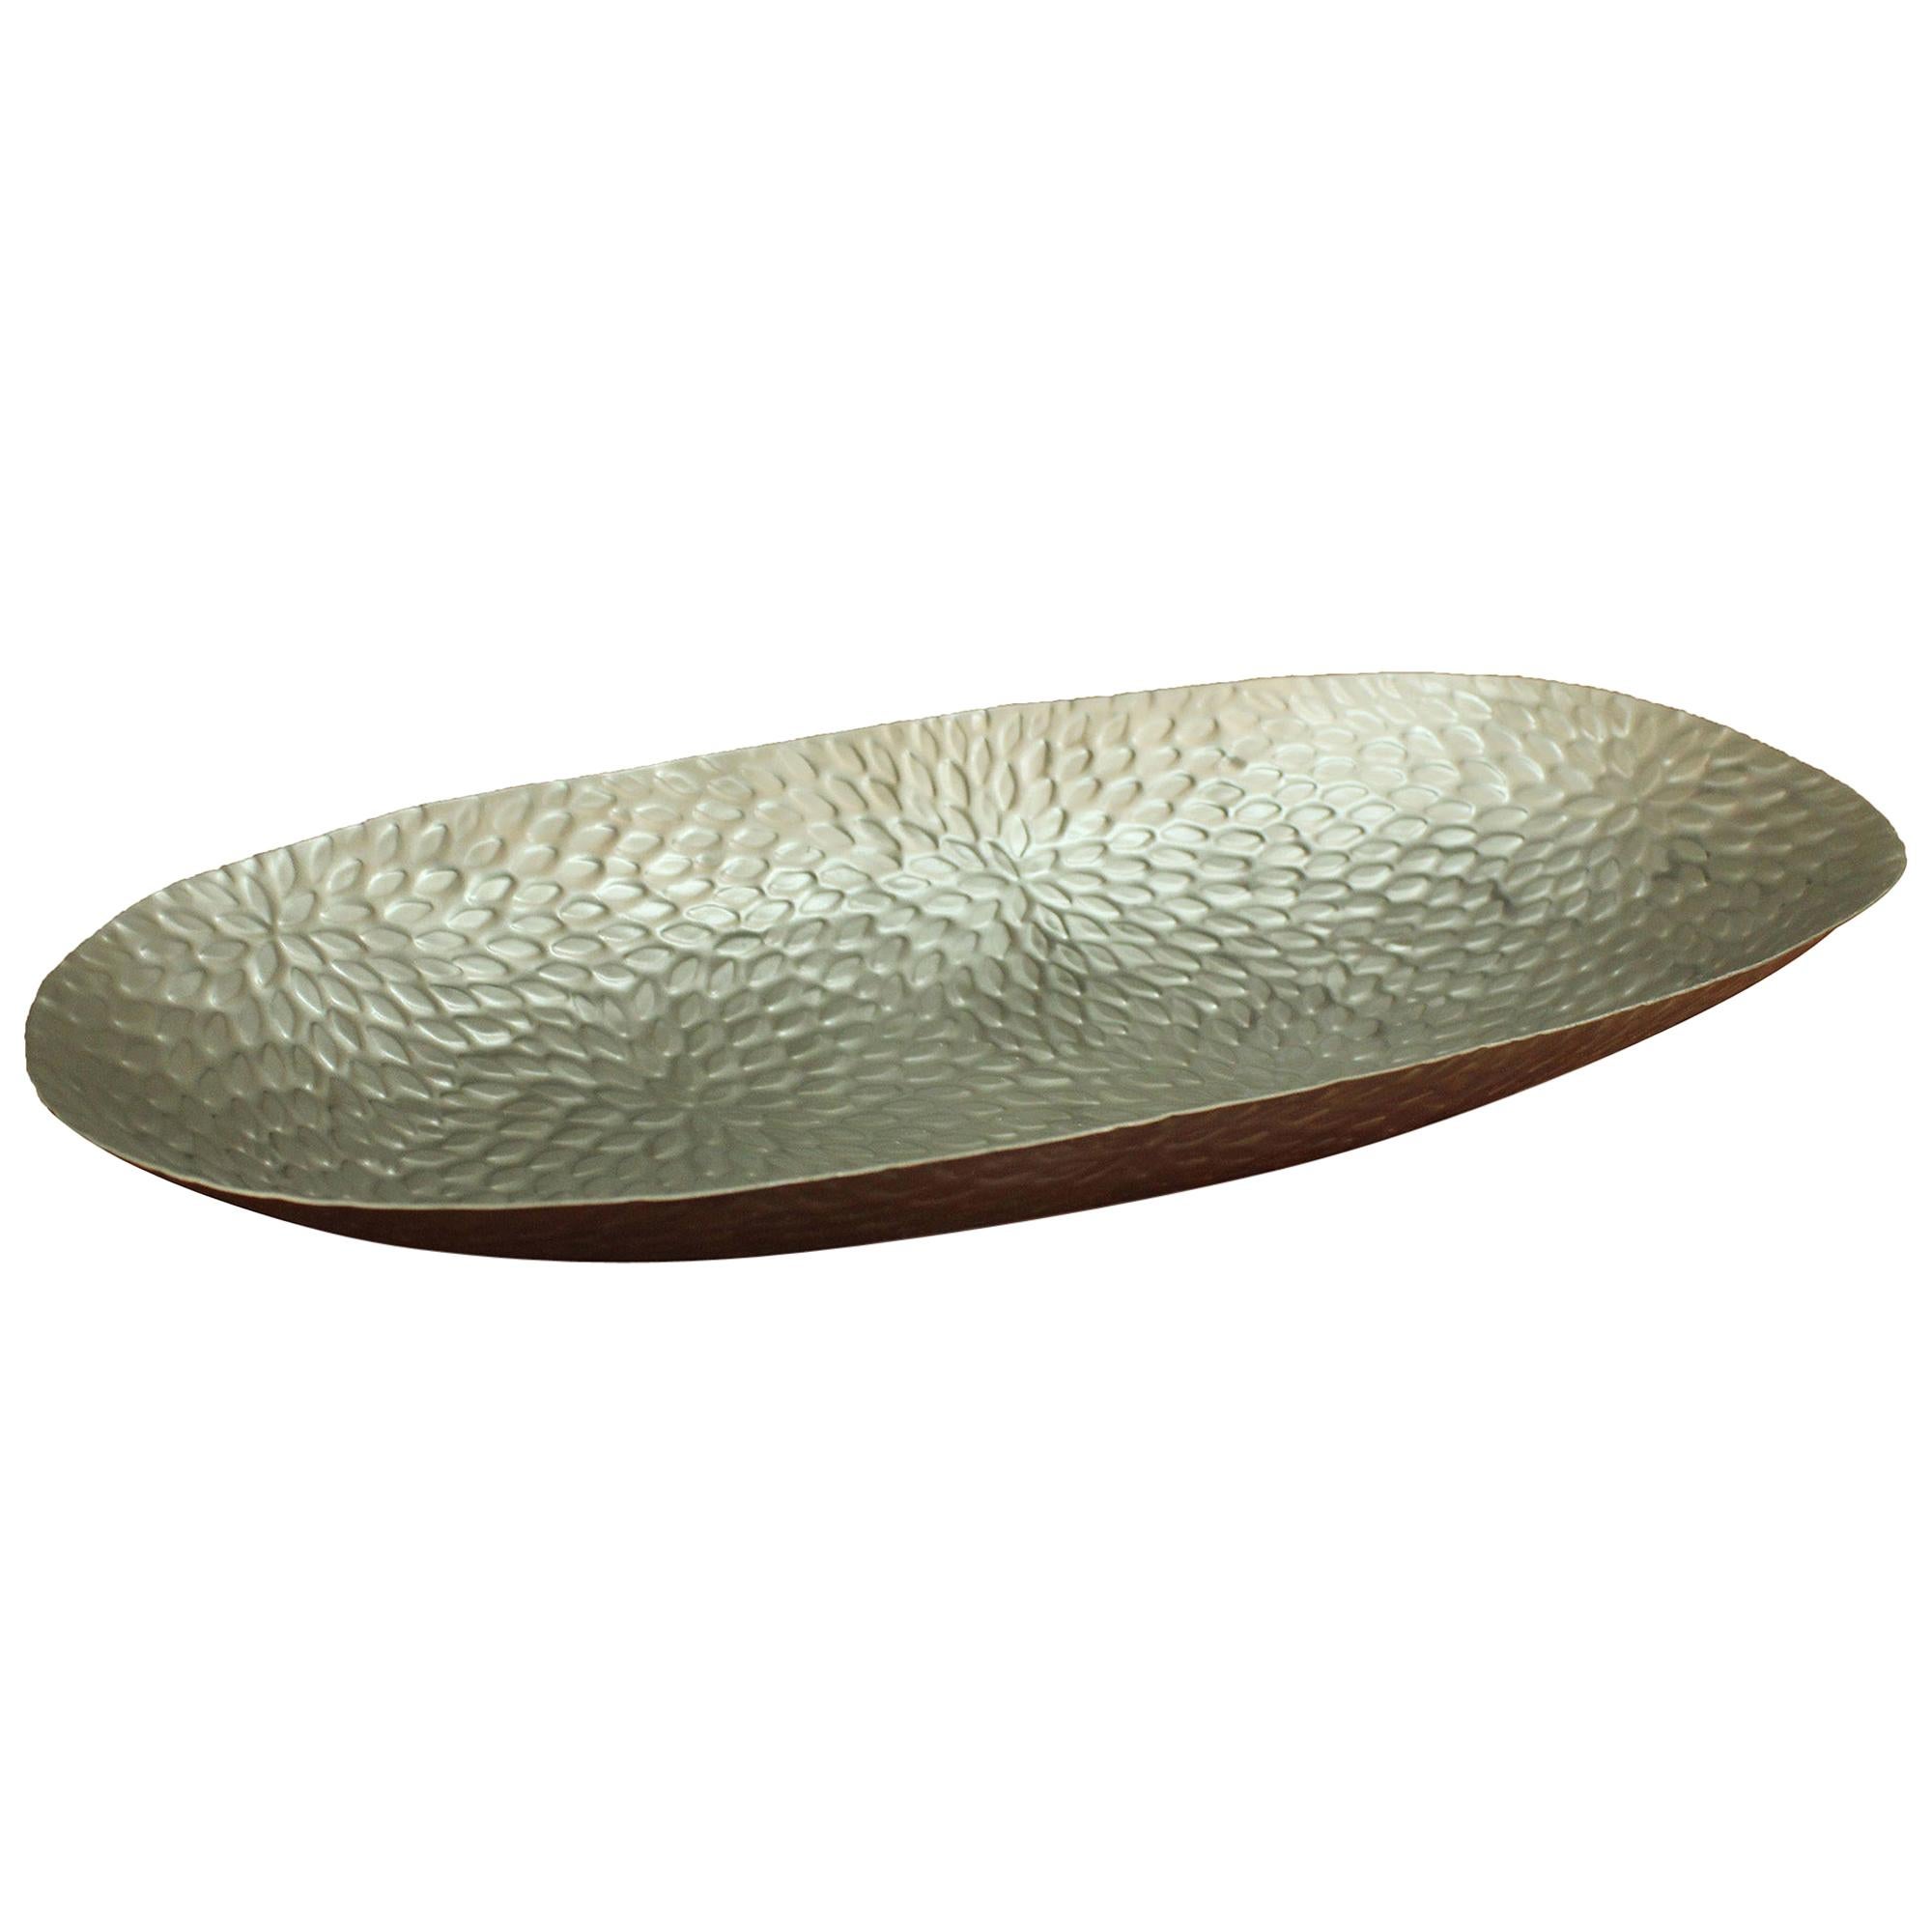 Silvia Tray in Matte Stainless Steel by Curatedkravet